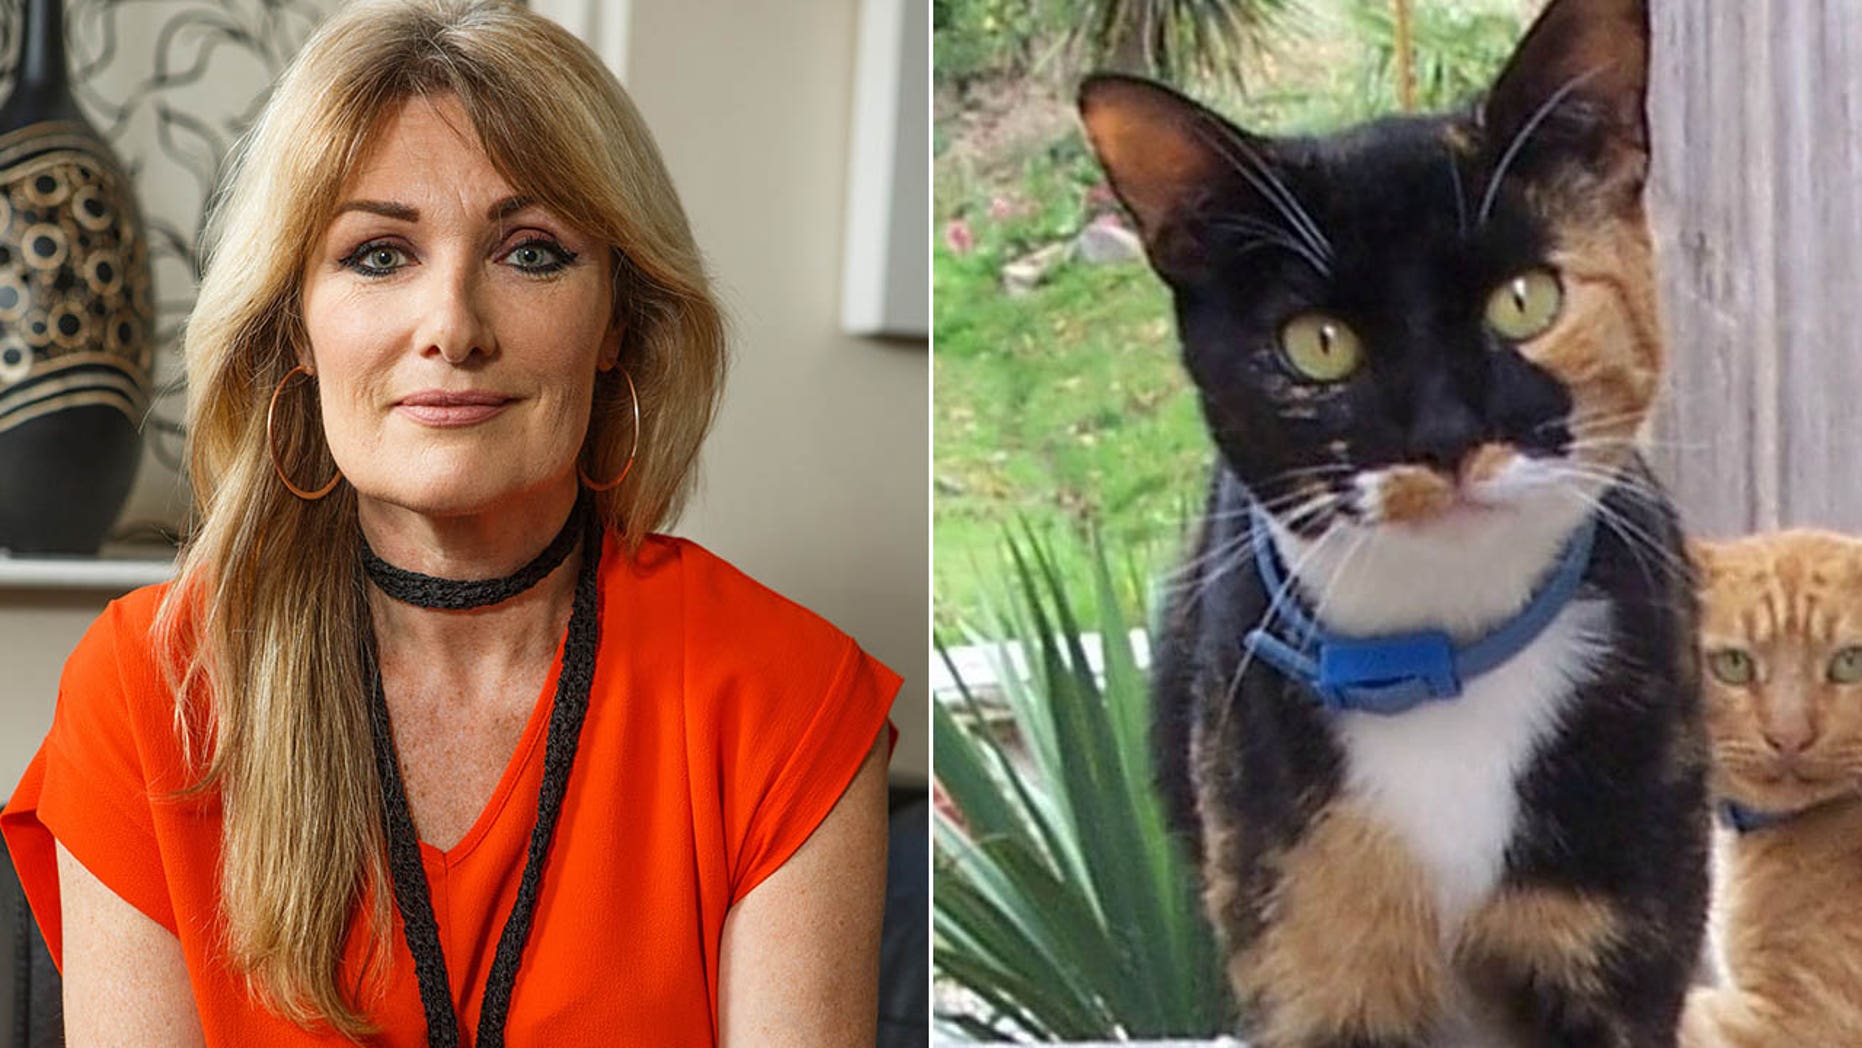 Woman links Lyme disease diagnosis to pet cat sleeping on bed